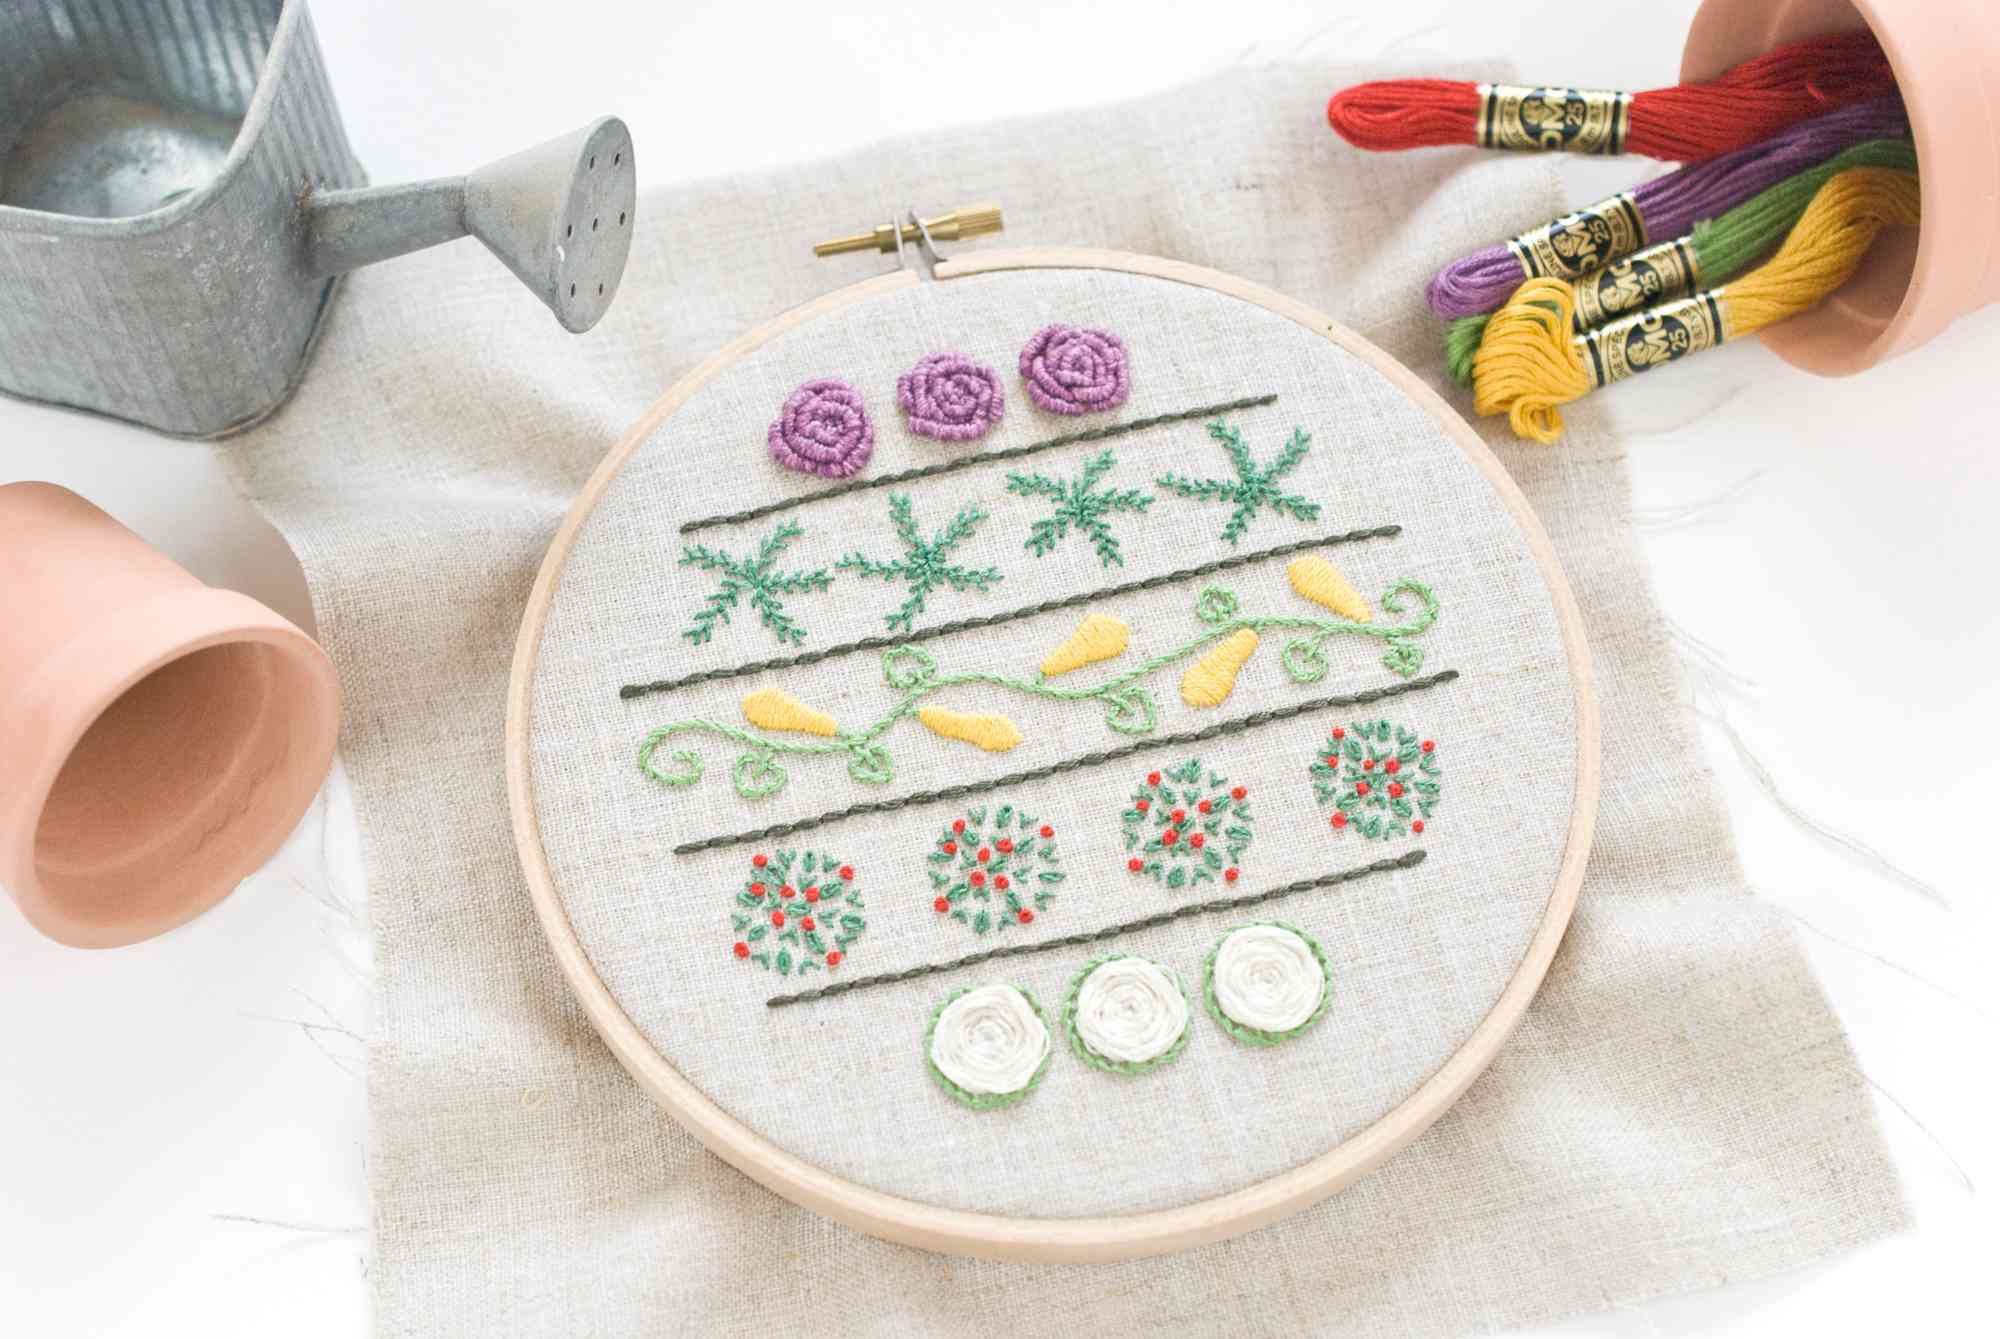 Embroidery Sampler Patterns Free 8 Embroidery Sampler Patterns